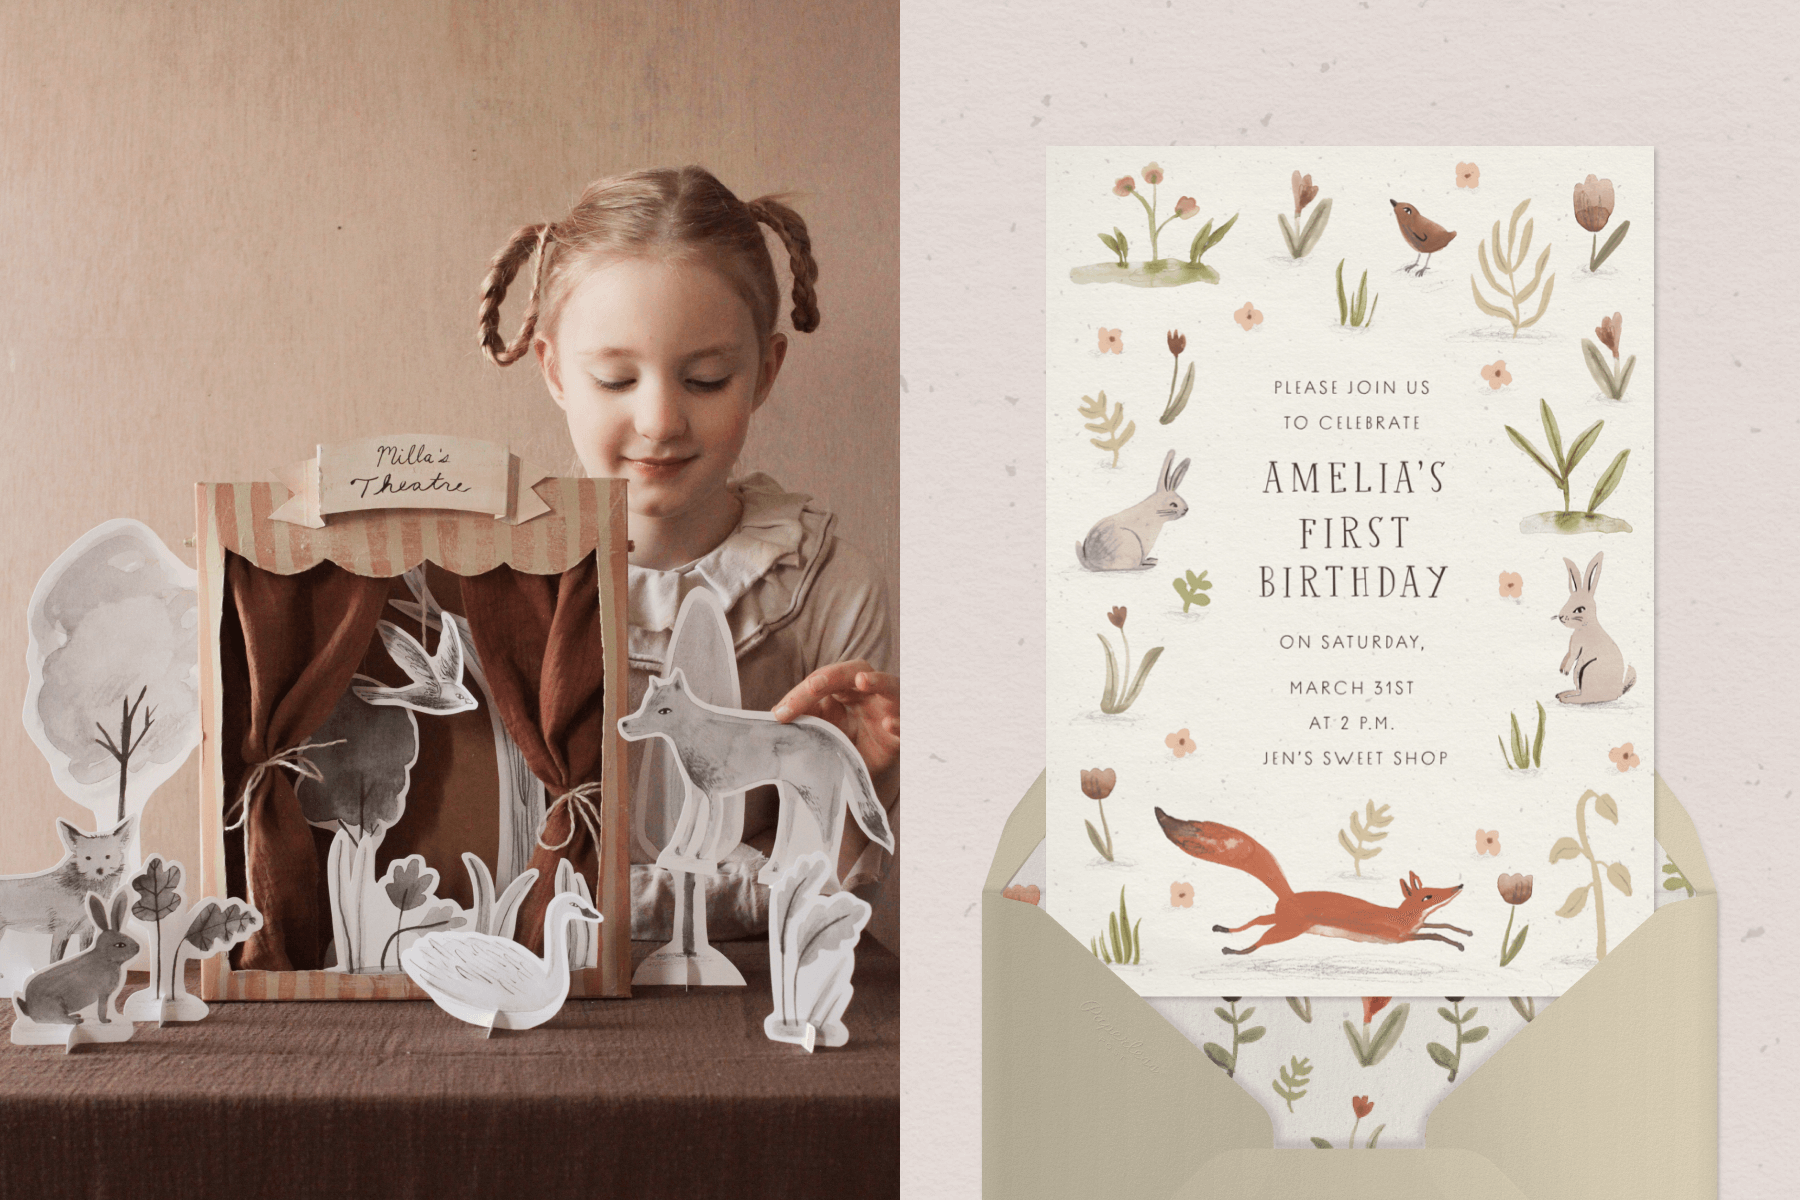 Left: Child playing with an illustrated paper cutout scene of animals performing in a theater. Right: Children's birthday invitation featuring a border of illustrated woodland creatures on an off-white background with a cream envelope.